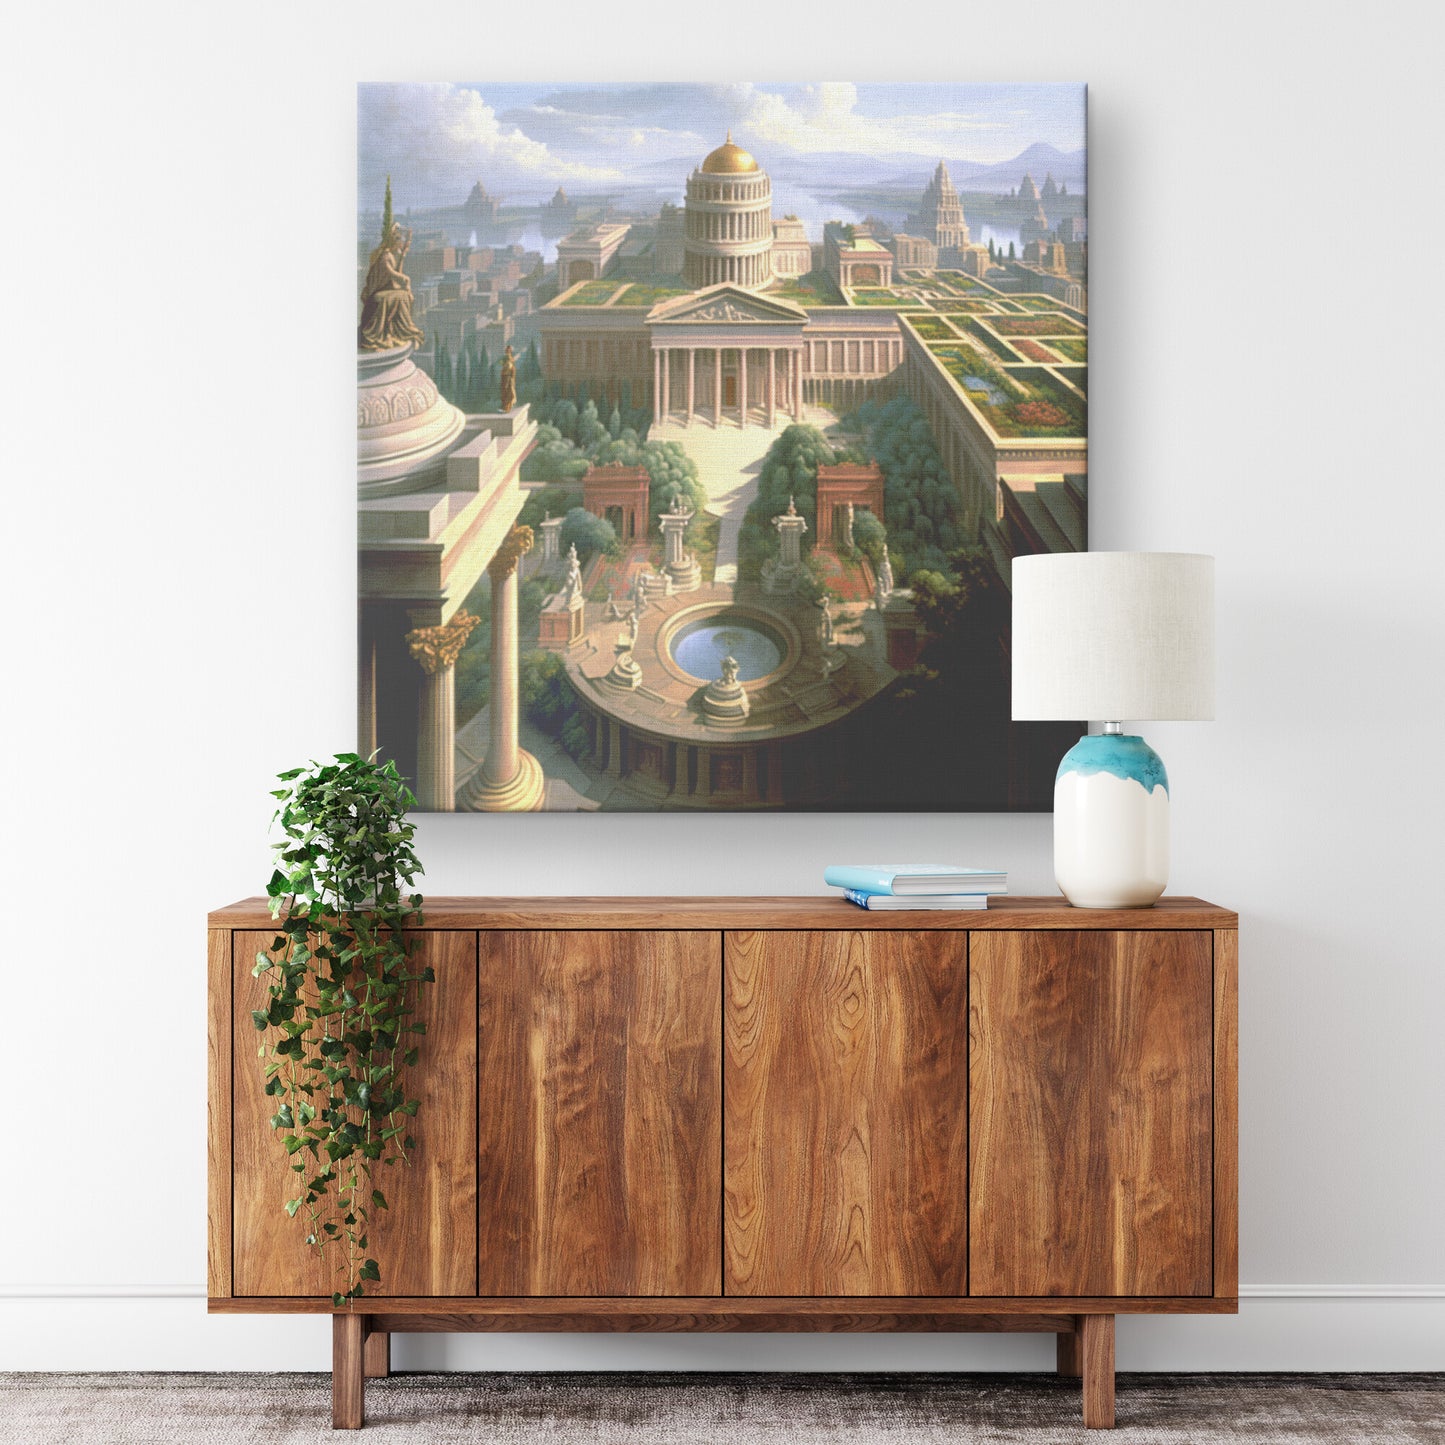 Palace Garden Landscape, Classical Garden and Statue Oil Painting, Midjourney AI Art